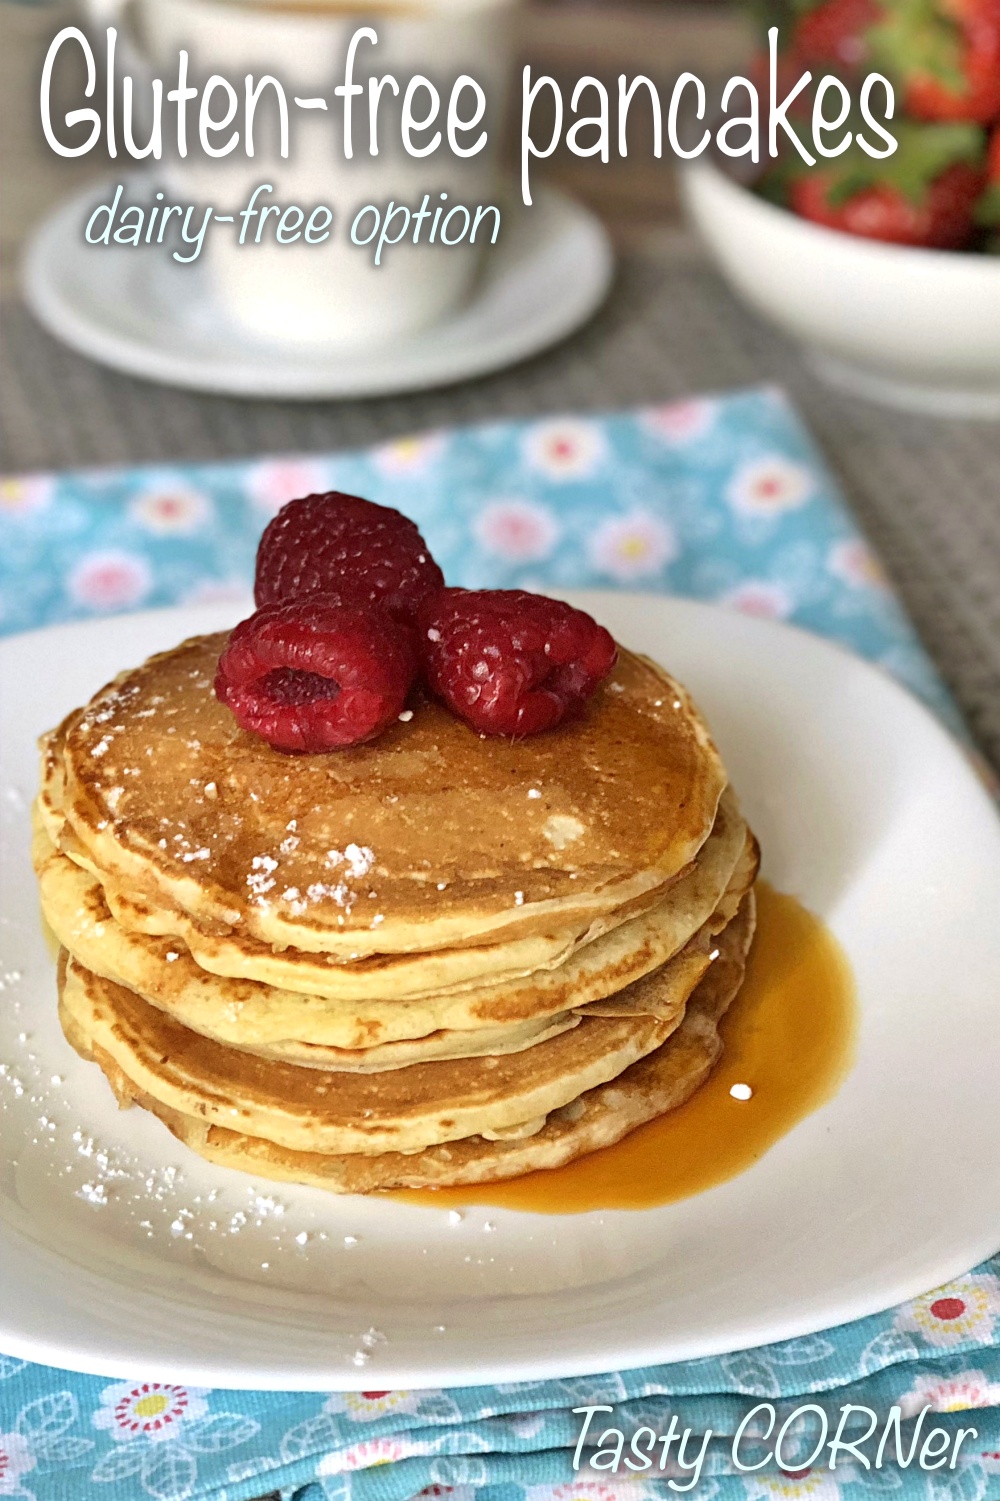 en_v_ gluten-free pancakes with dairy-free option made with rice flour easy recipe by tasty corner blog